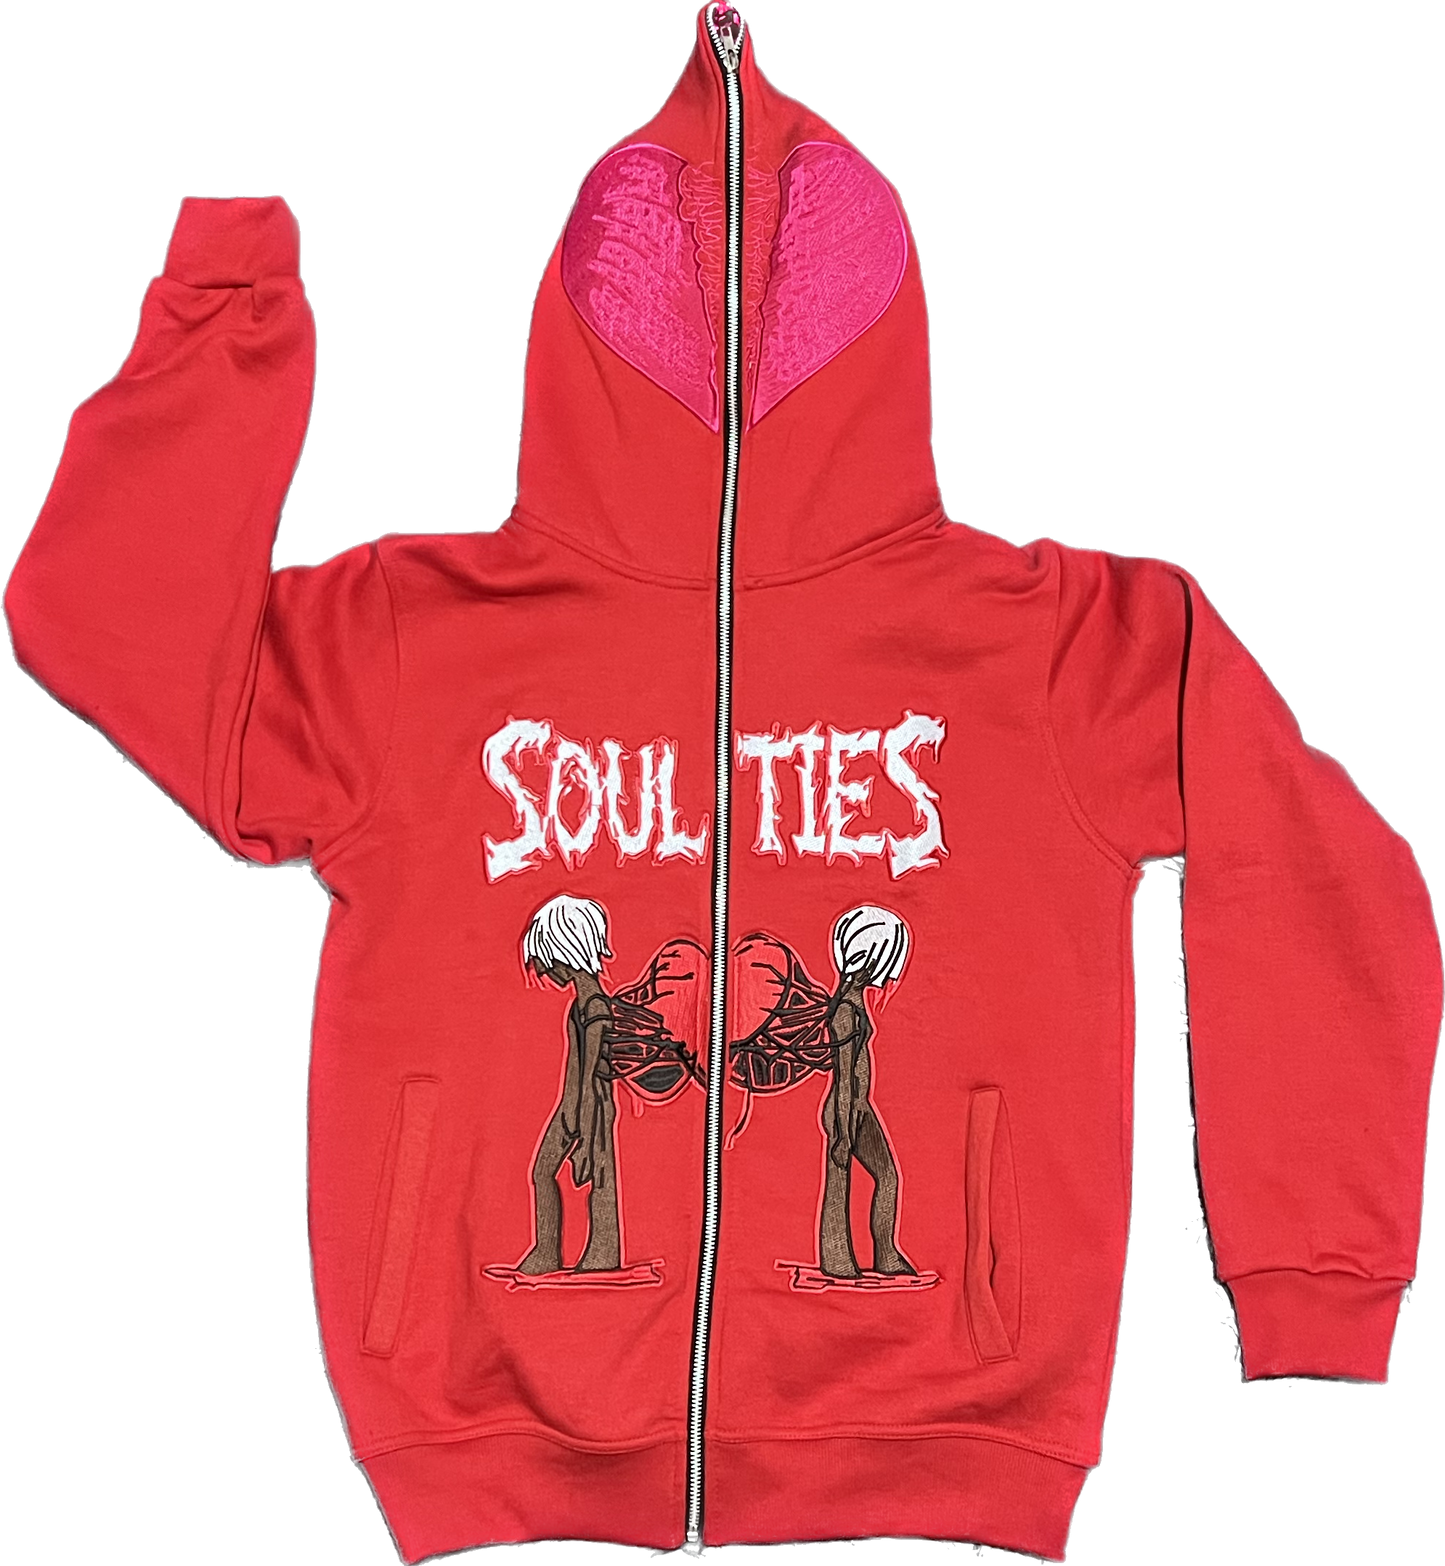 INFLUENTIAL 'SOULTIES' FULL-ZIP VALENTINES DAY